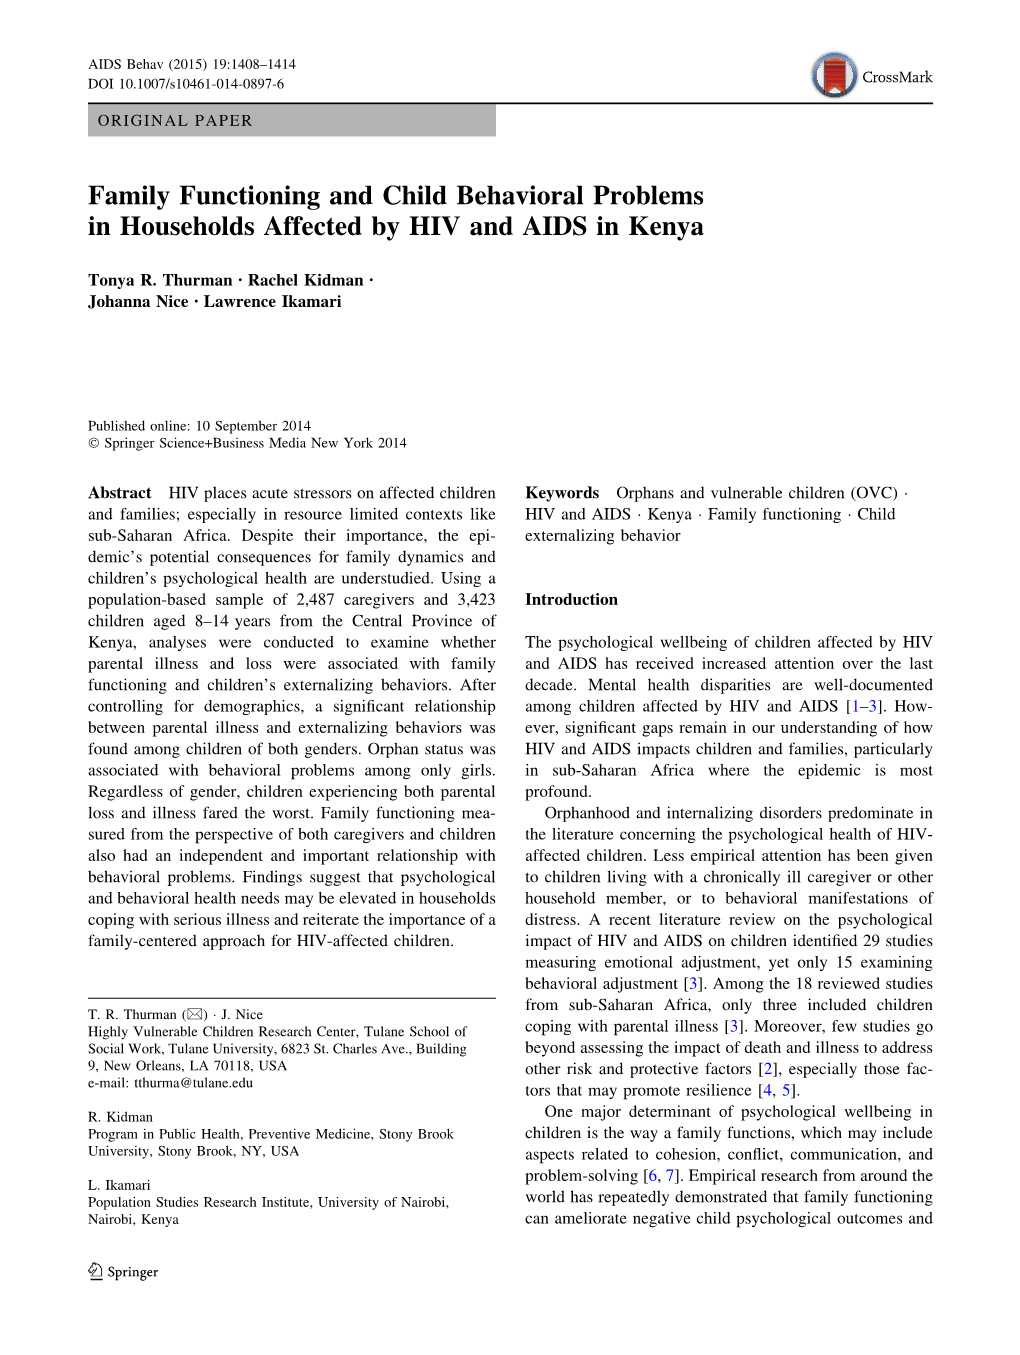 Family Functioning and Child Behavioral Problems in Households Affected by HIV and AIDS in Kenya